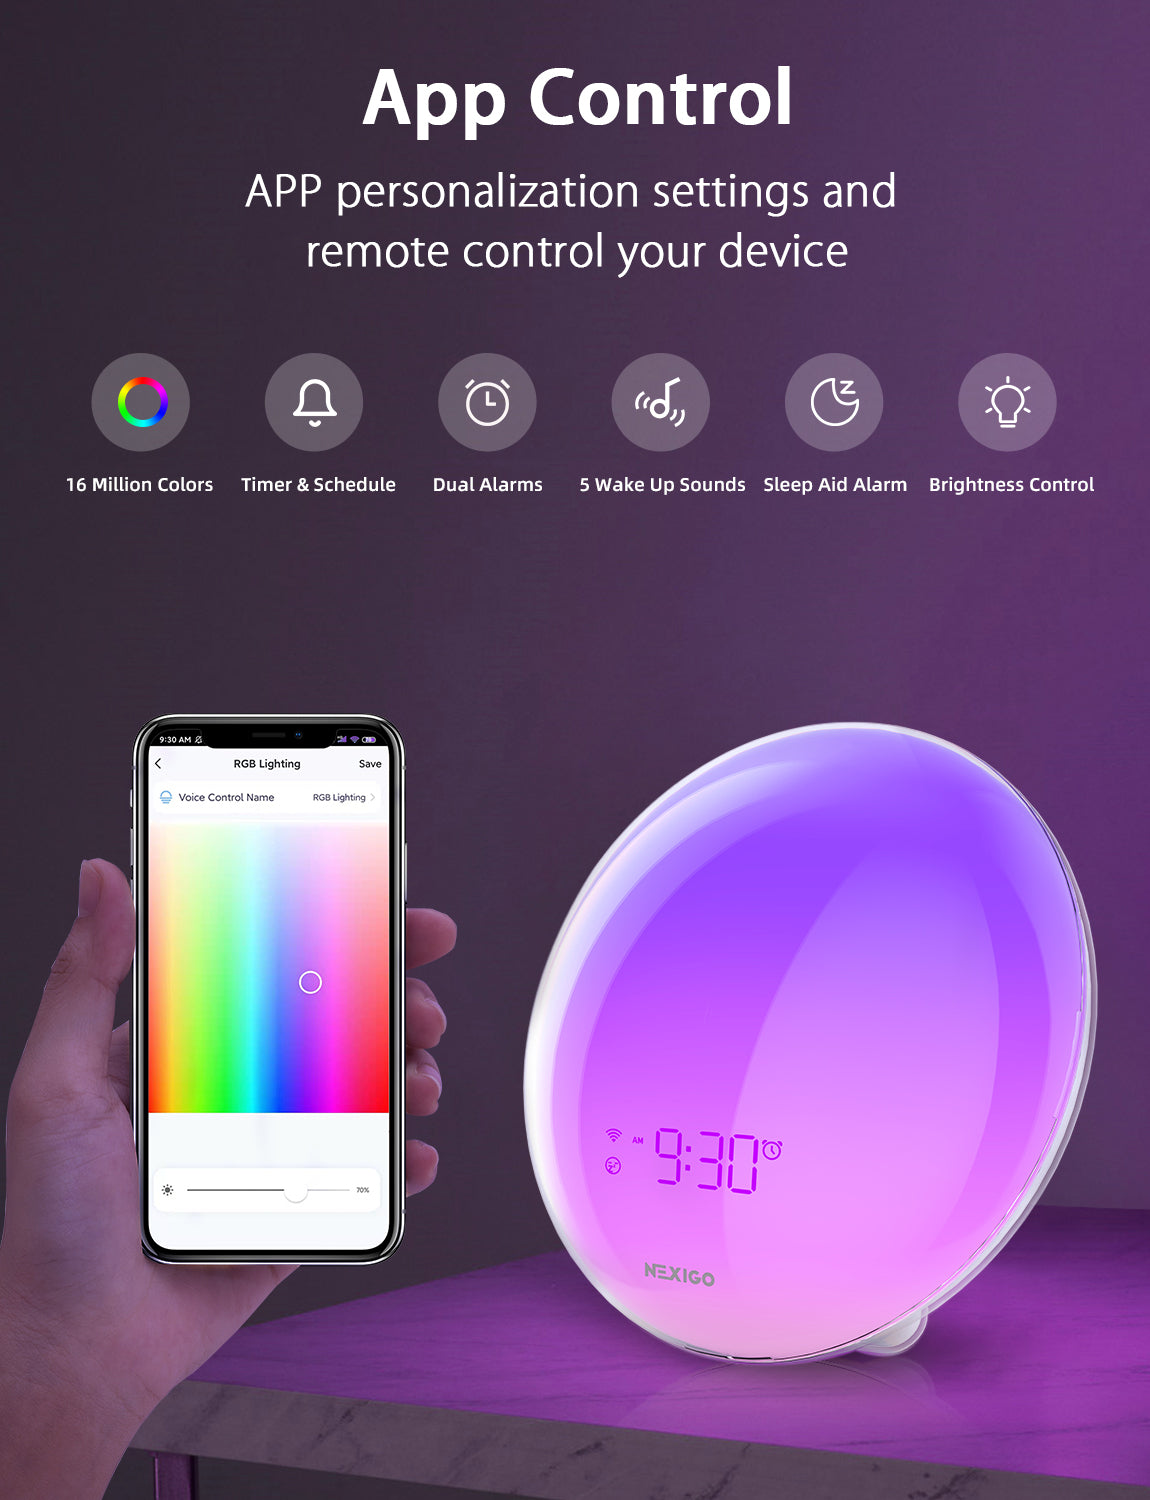 Alarm clock with app settings for Colors, Timer & Schedule, Dual Alarms, etc.